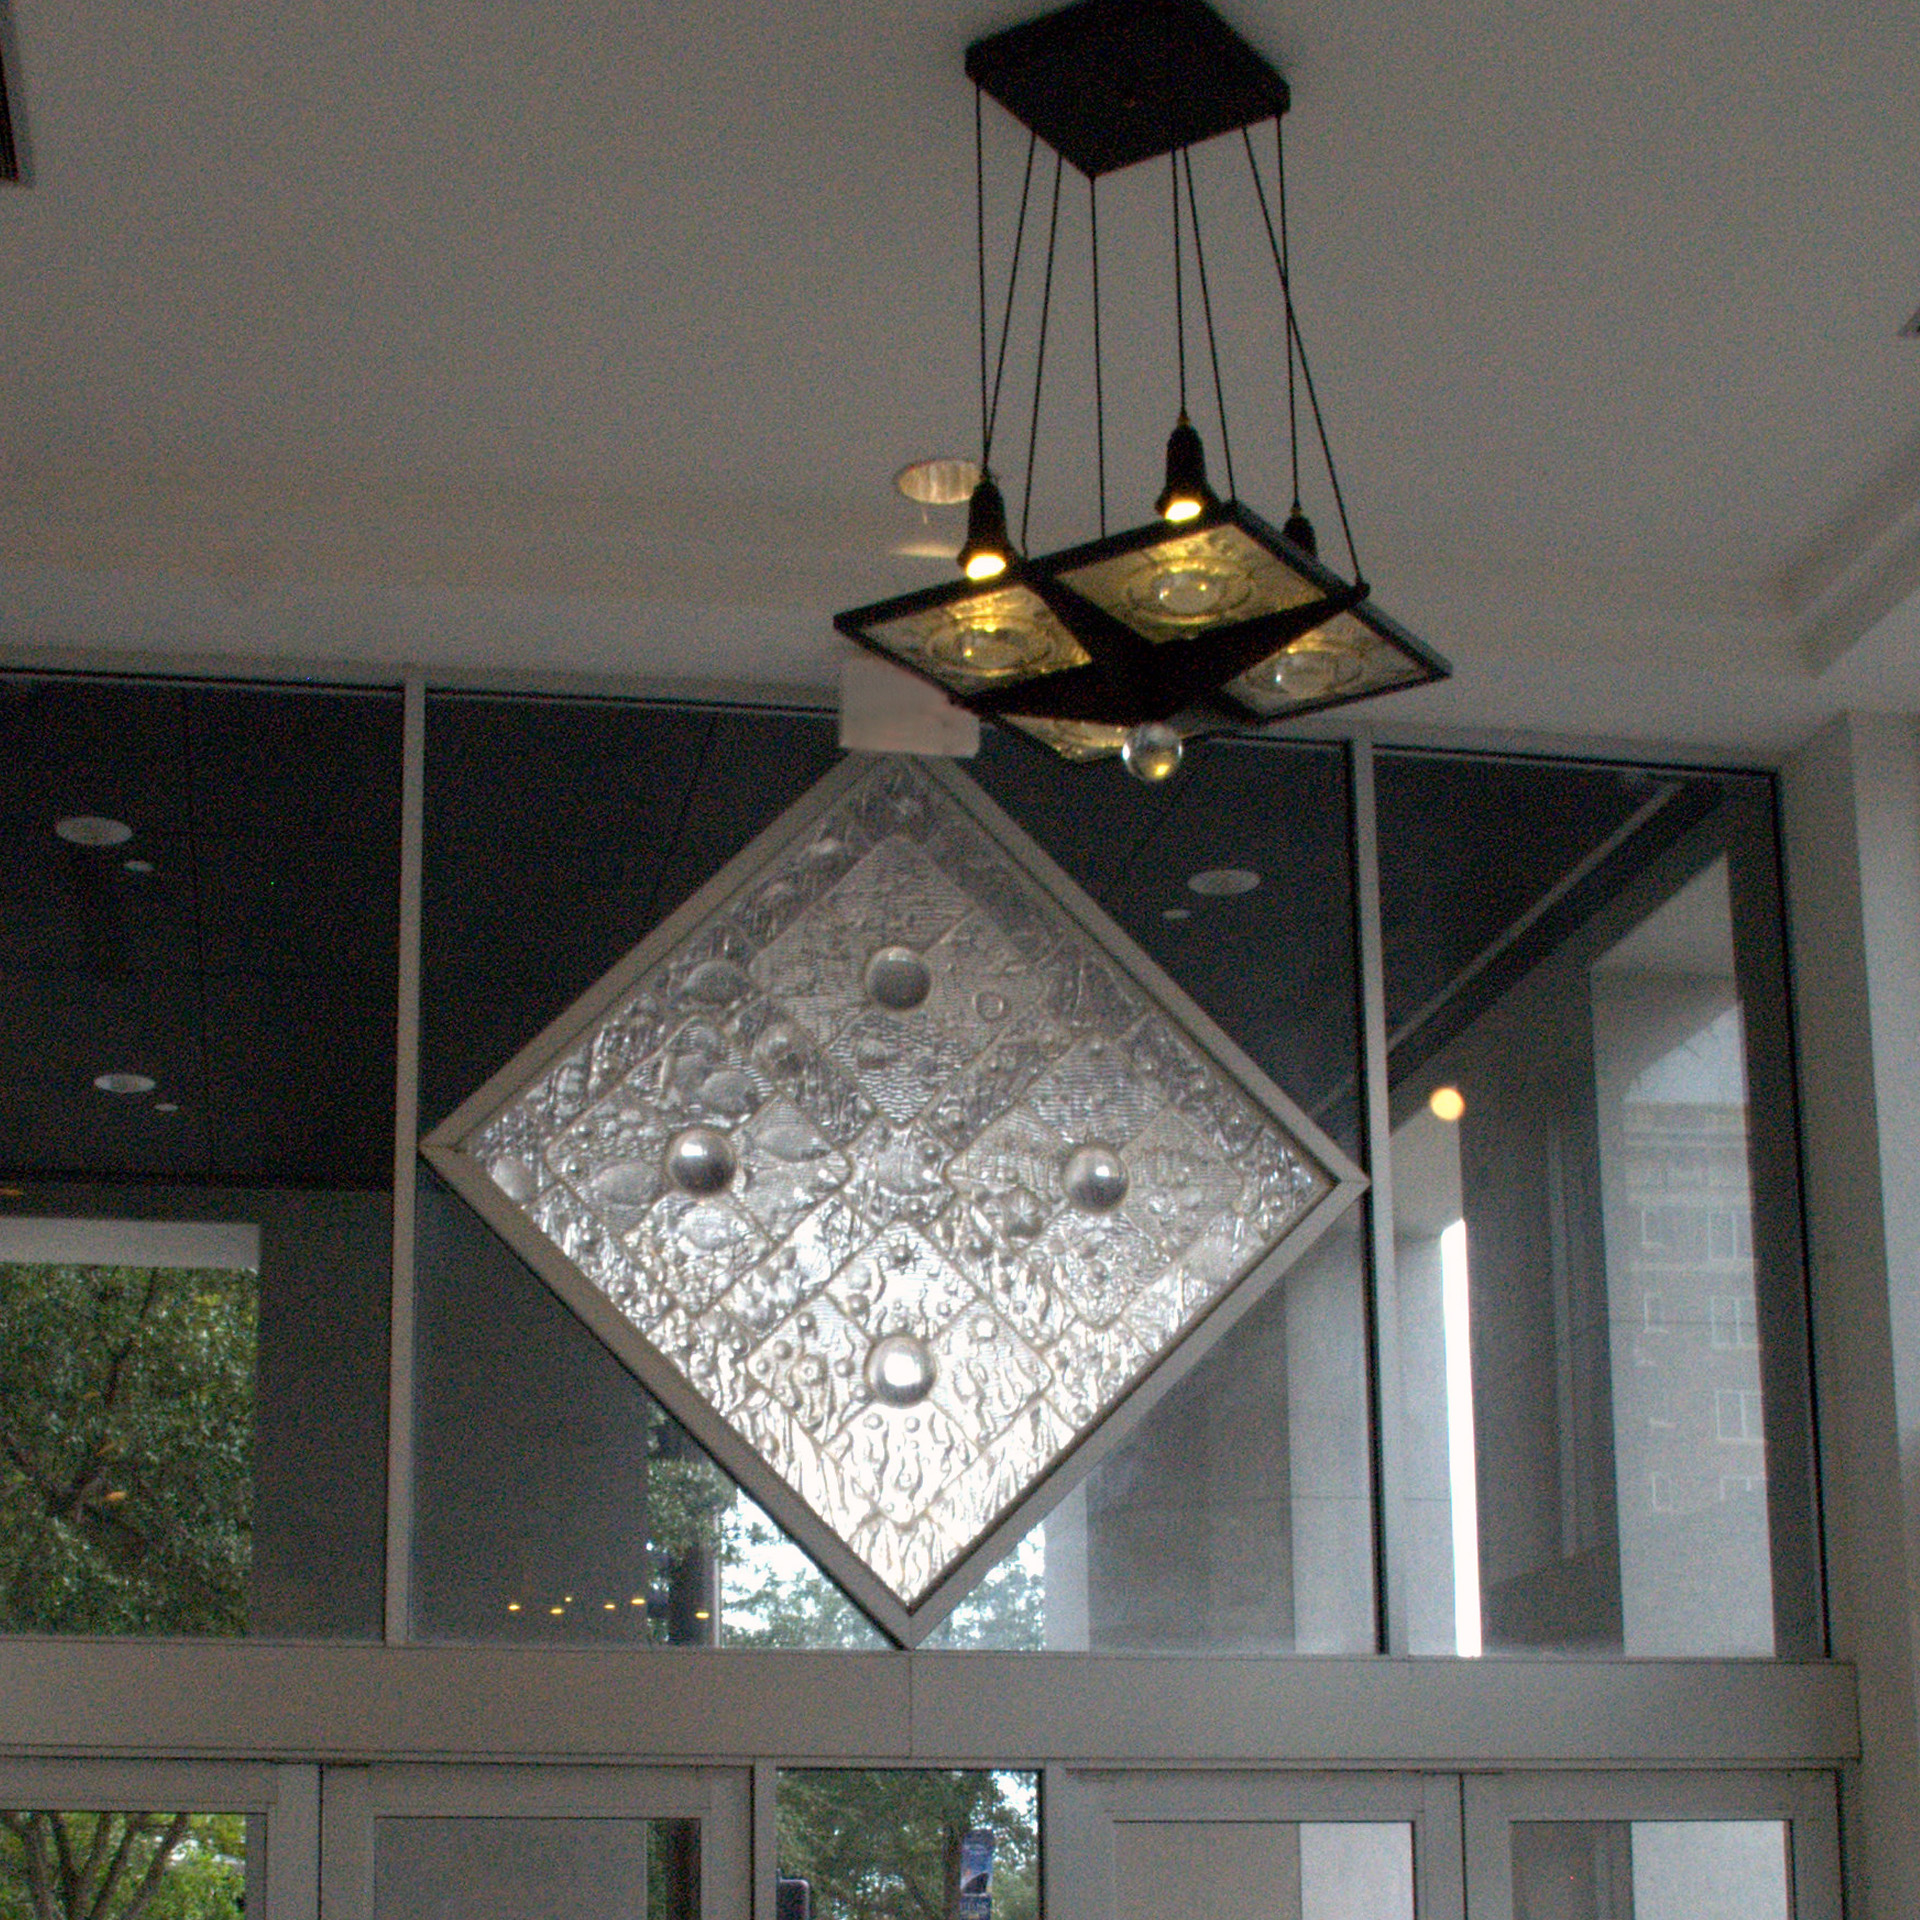 1- EARTH SIGN with Chandelier (1)